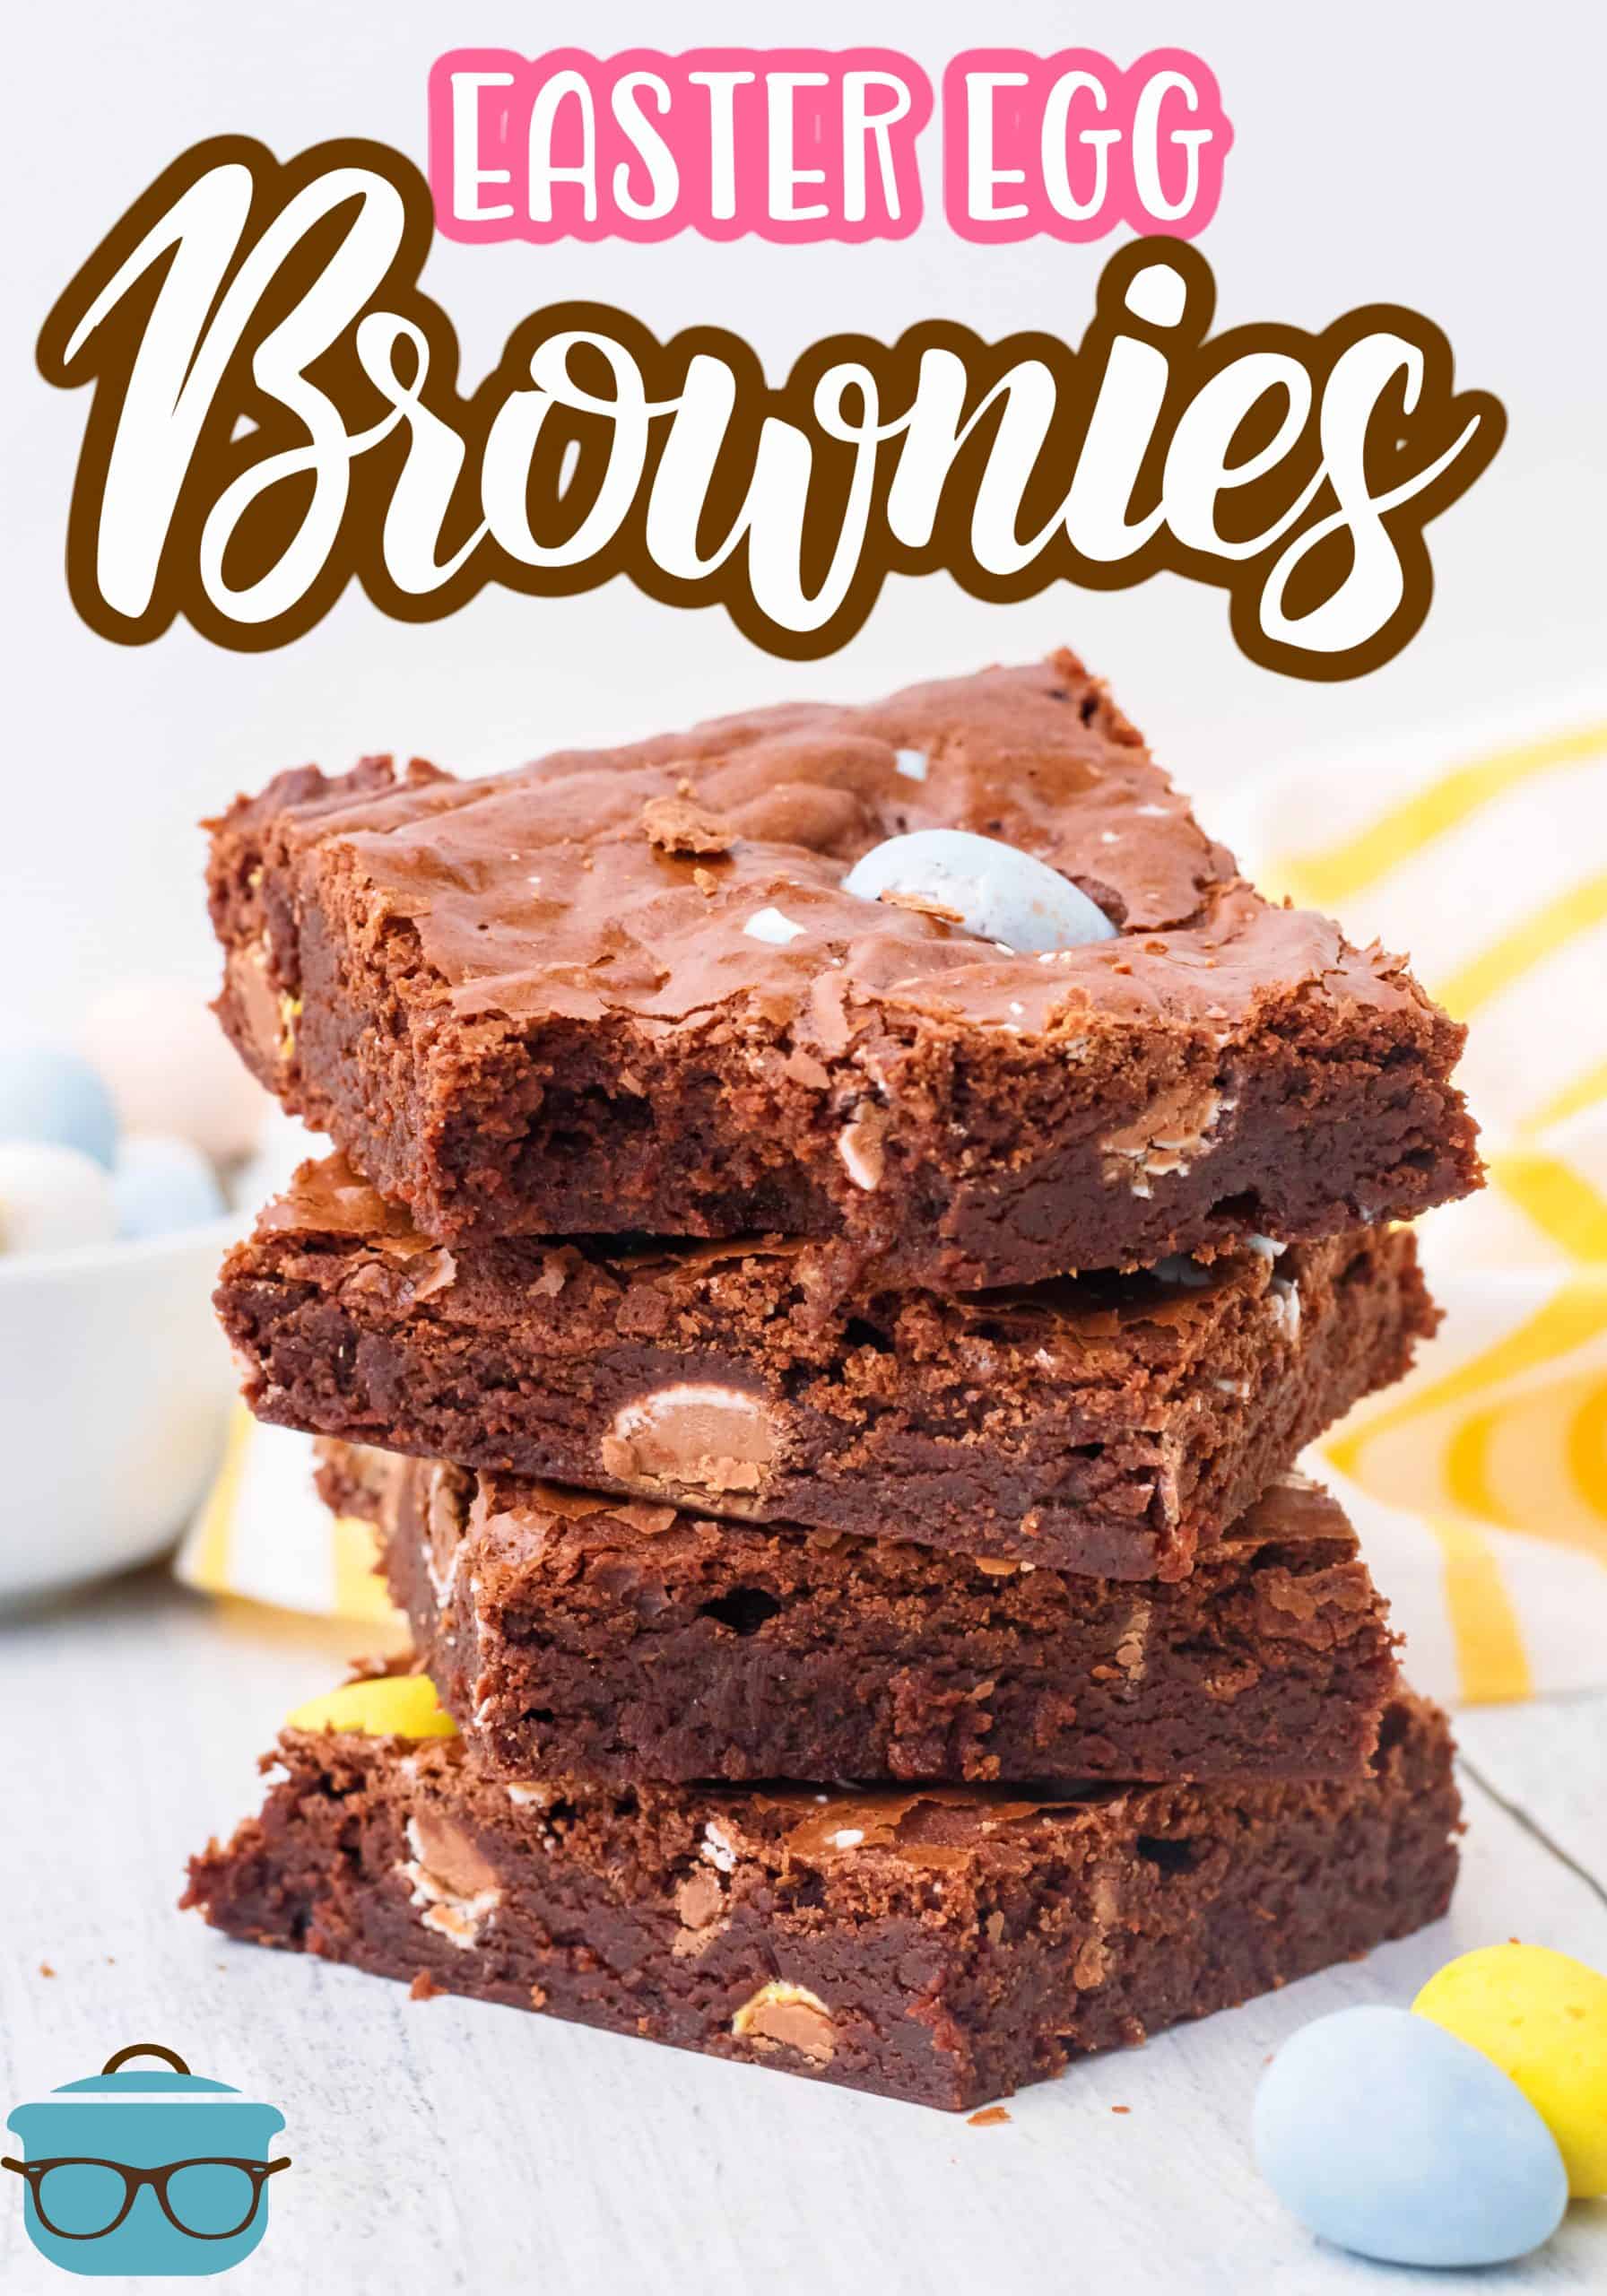 Stacked Easter Egg Brownies with bite taken out of the top one.